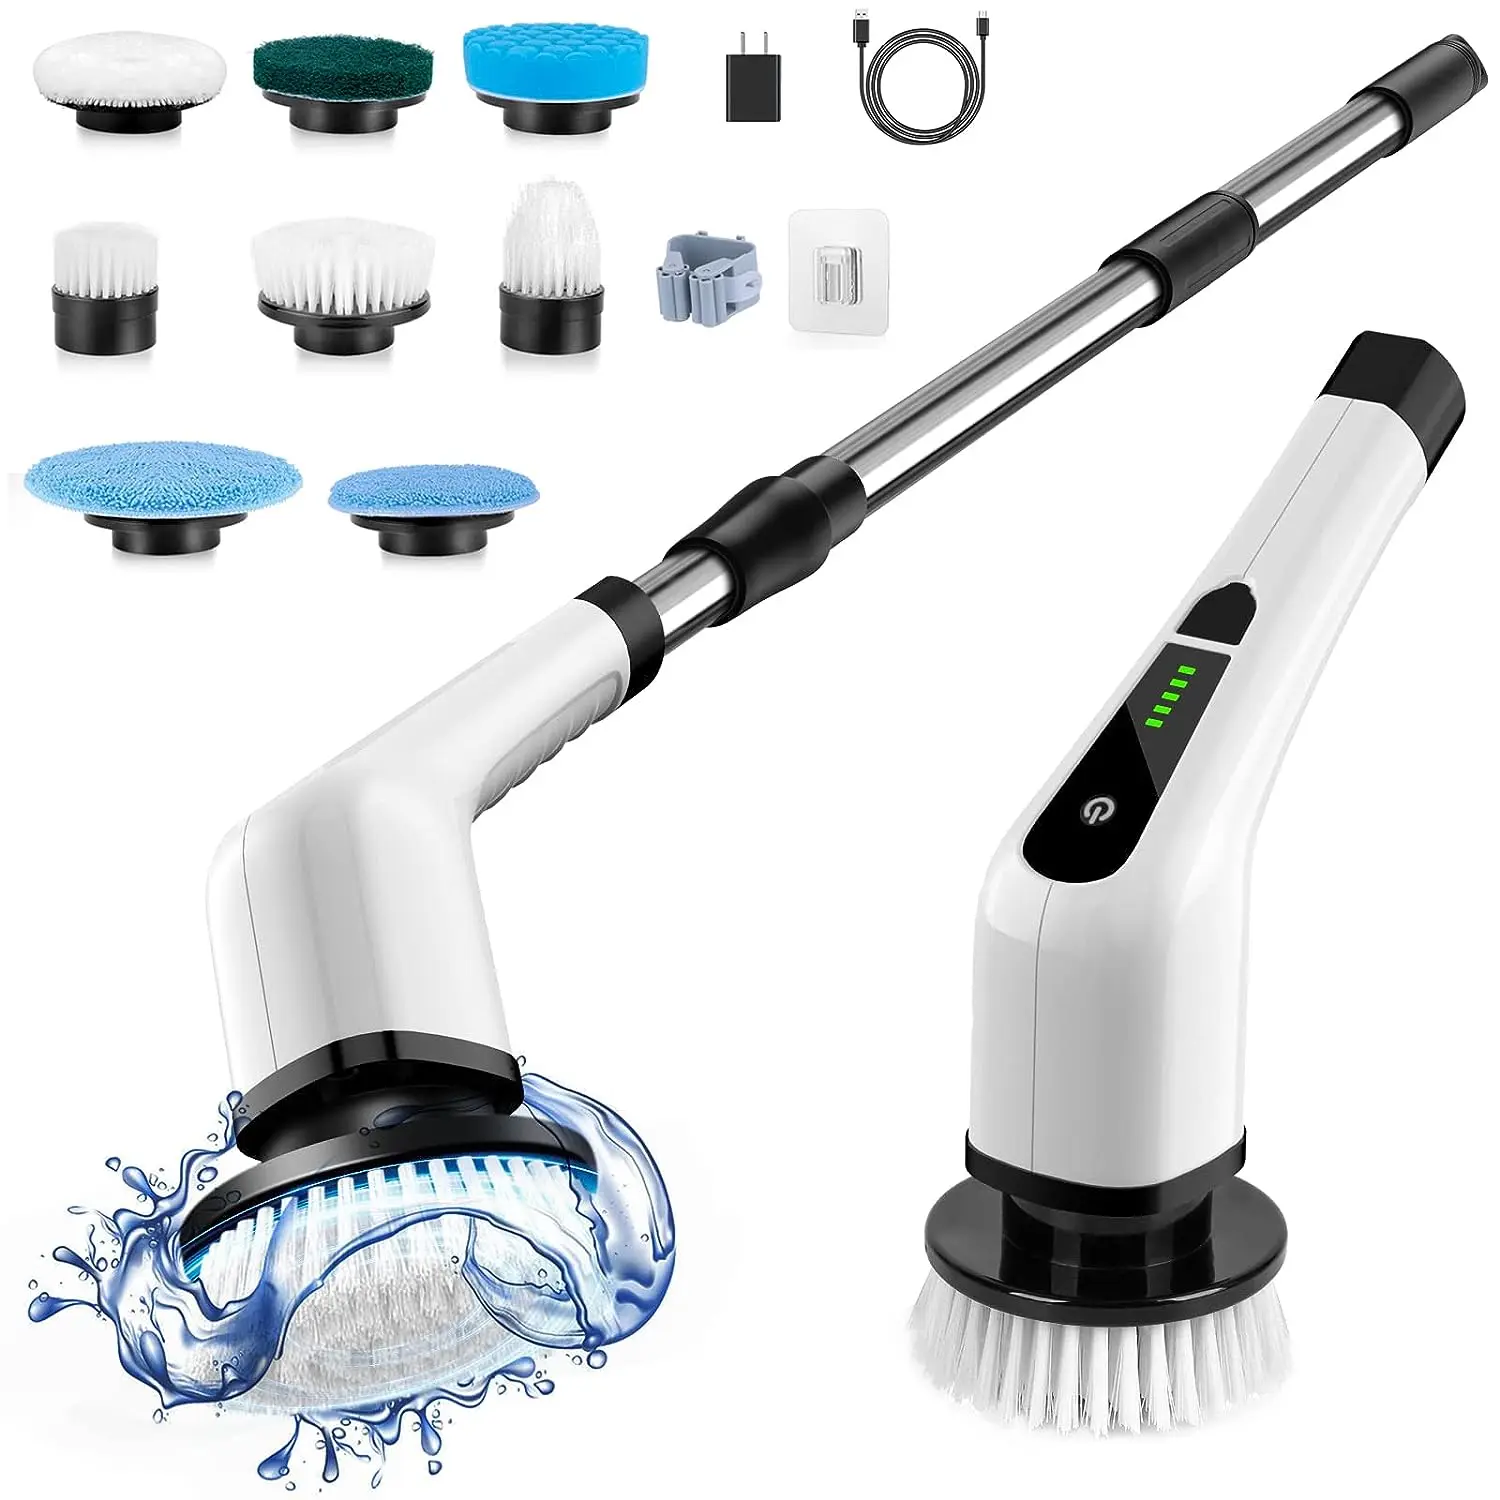 

Electric Spin Scrubber New Cordless Voice Prompt Shower Cleaning Brush with 8 Replaceable Brush Heads Extension Handle for Car